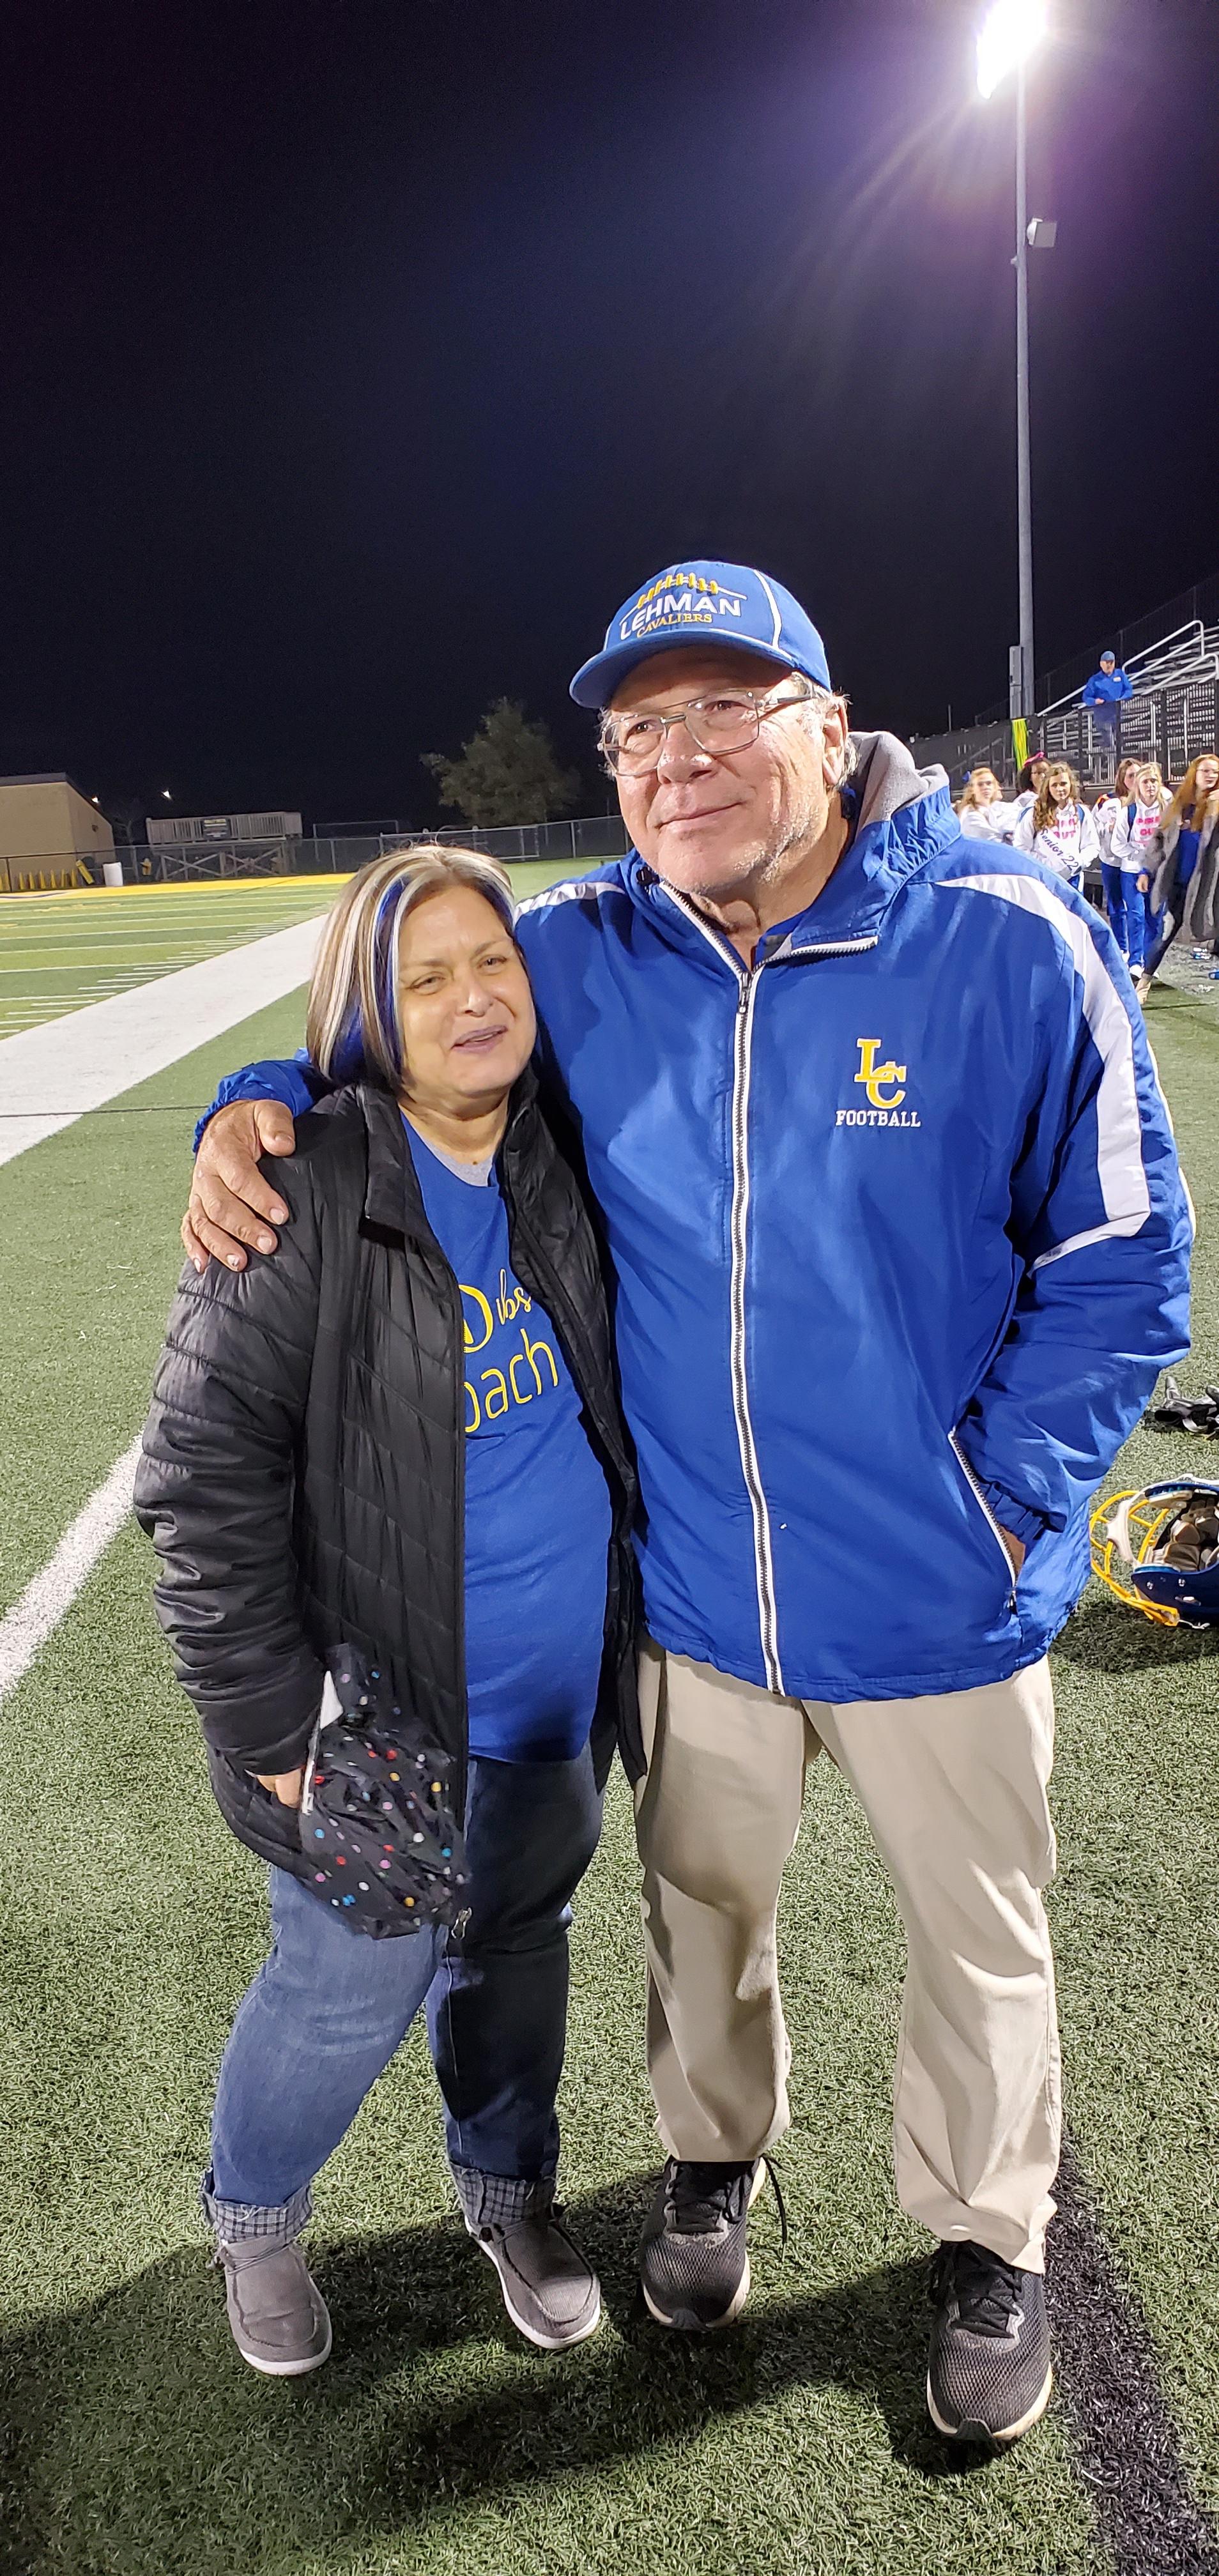 Coach Roll and his wife. 